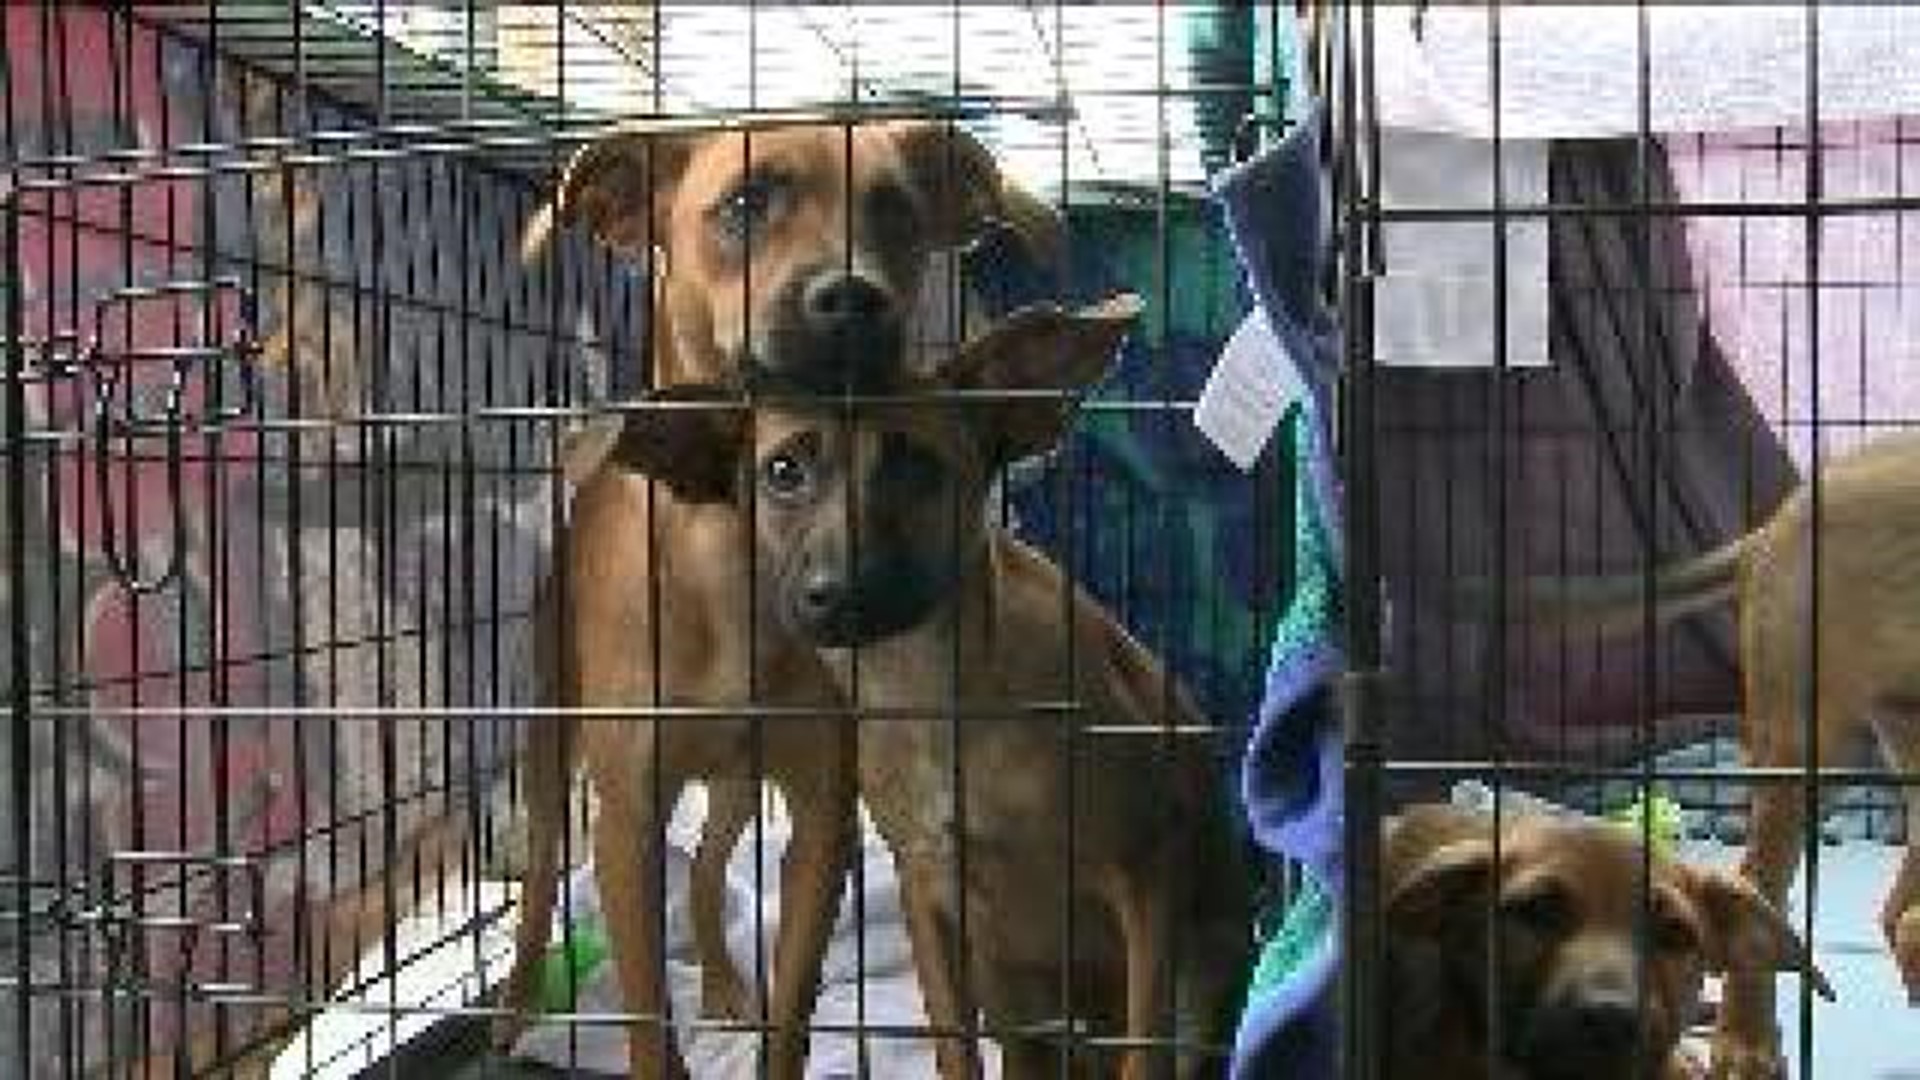 Brothers Raise Money for Pet Rescue